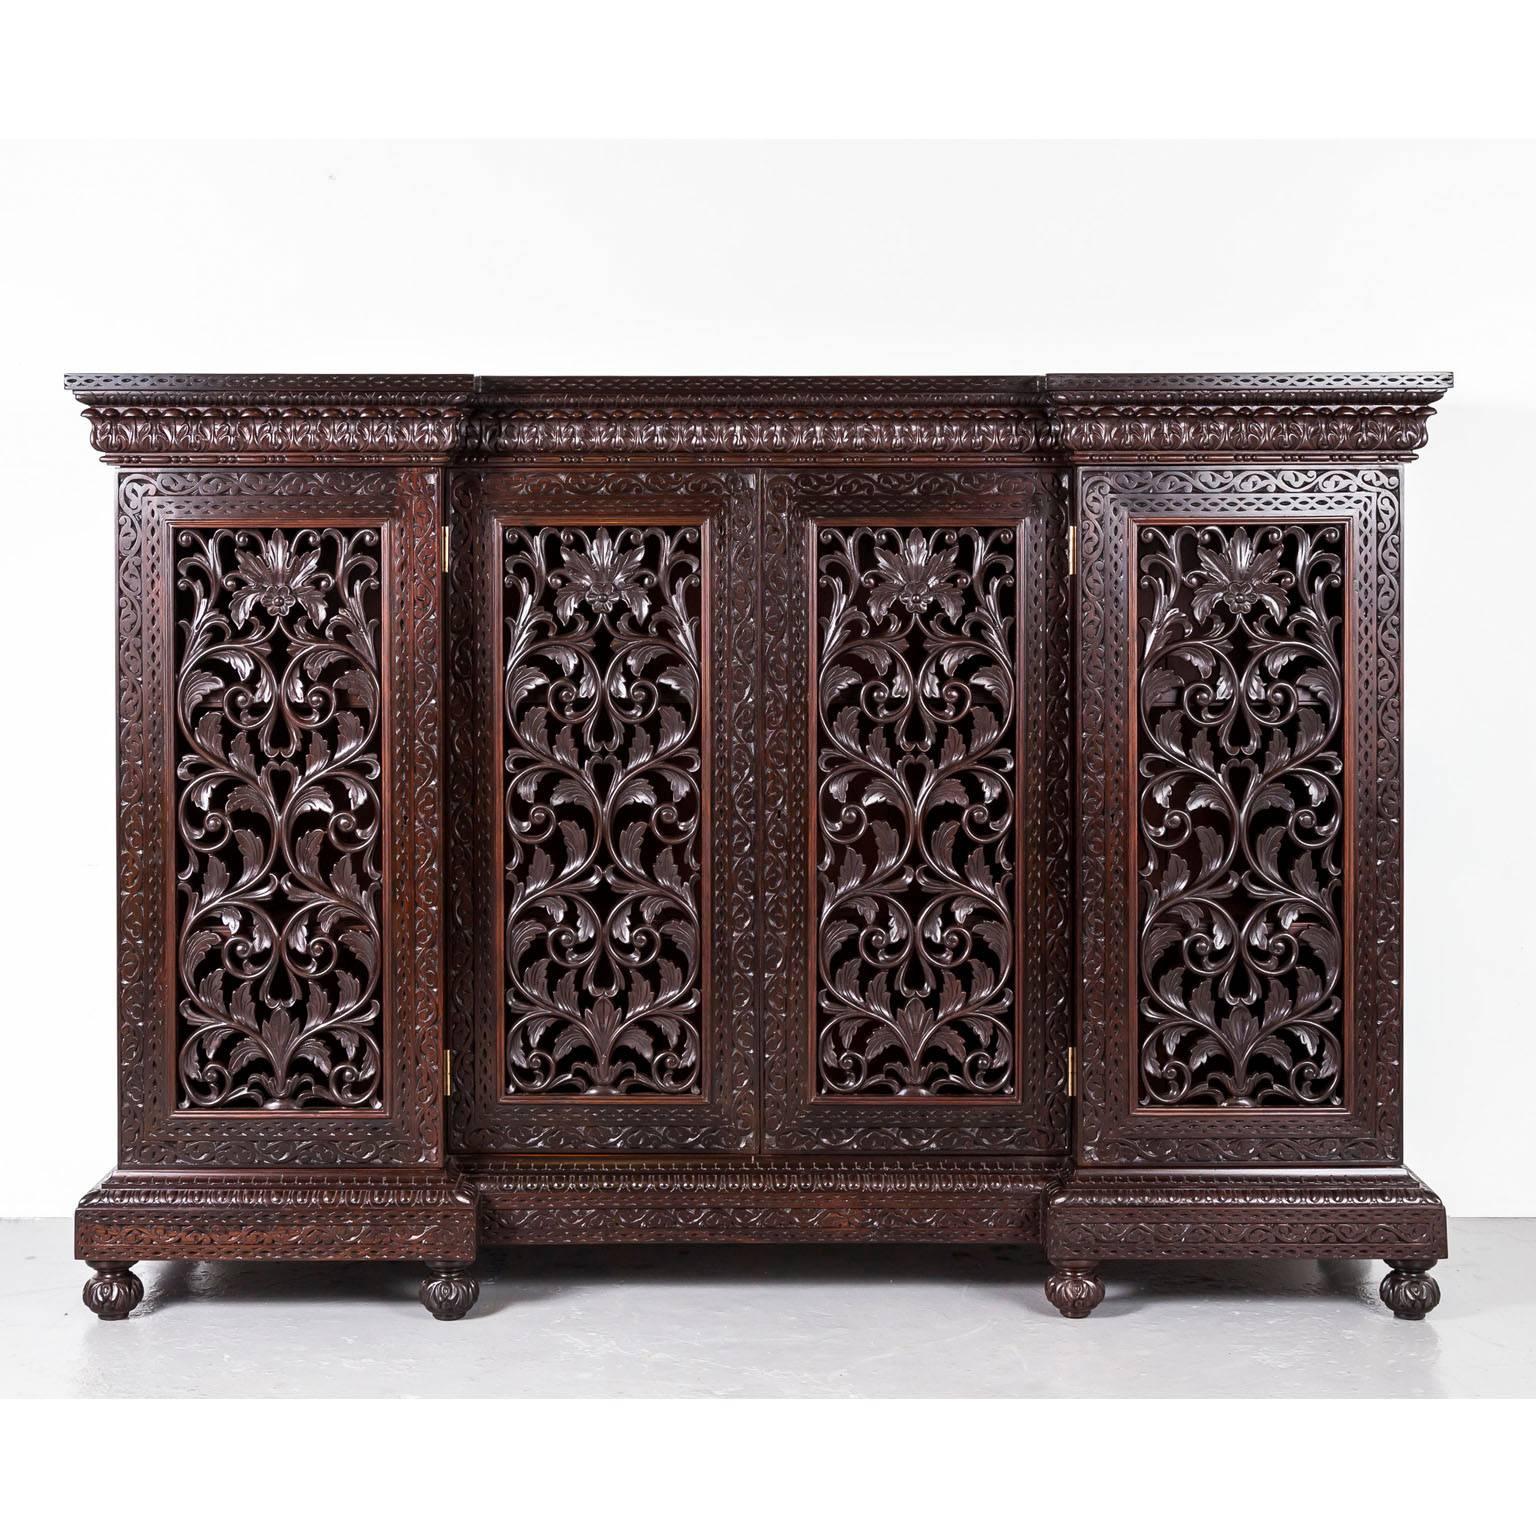 A beautifully carved and pierced British Colonial breakfront cabinet in rosewood. The overhanging top is made of one piece of rosewood and carved with two borders. The front is mounted with four hinged doors that are boldly carved and pierced with a